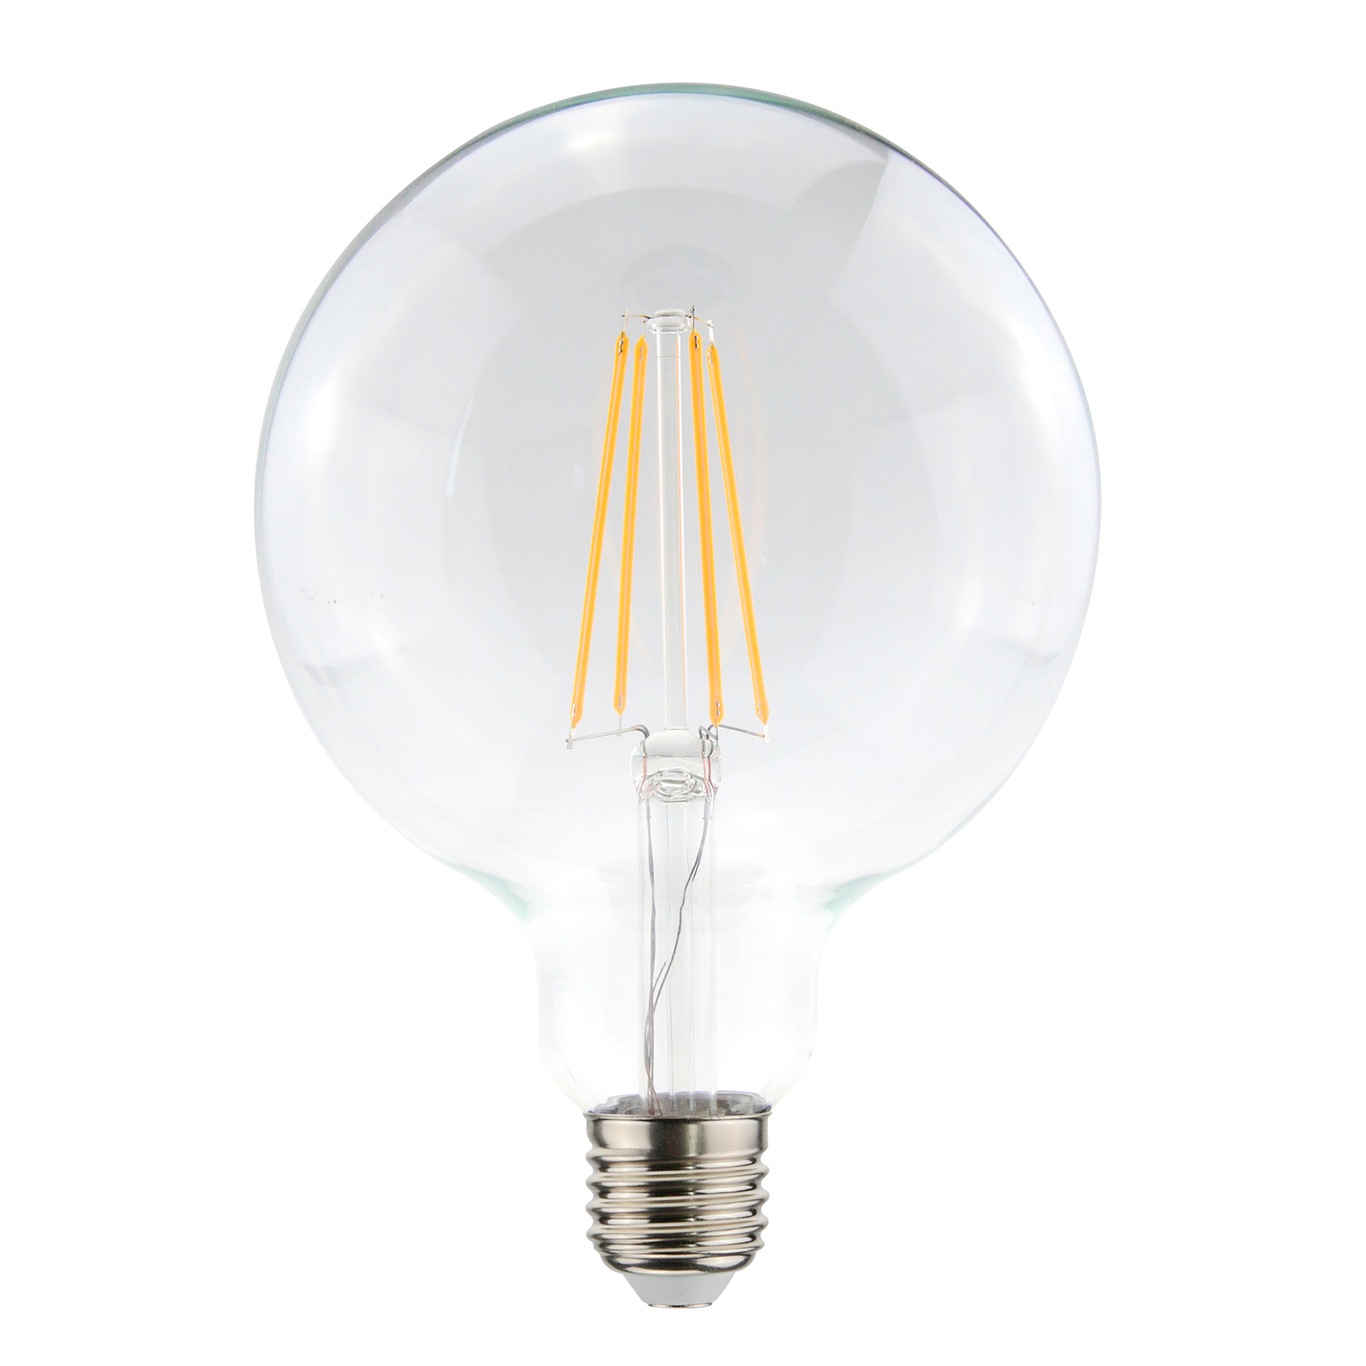 LED Decor Filament Globe 125mm 2200K 3W E27 300lm Dimmable Clear